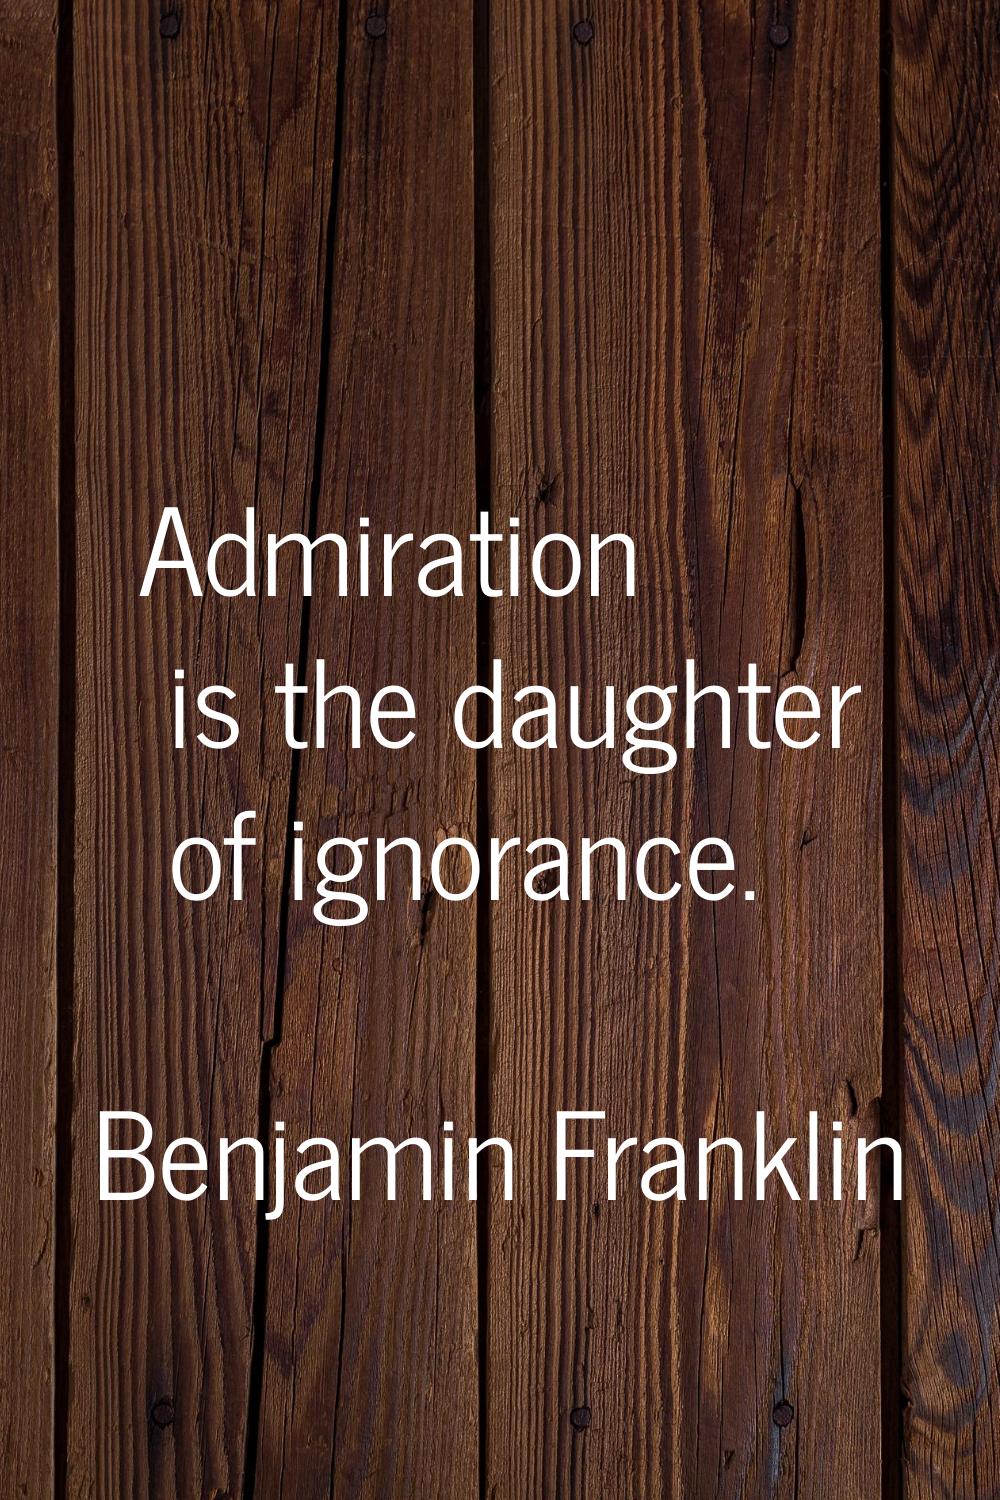 Admiration is the daughter of ignorance.